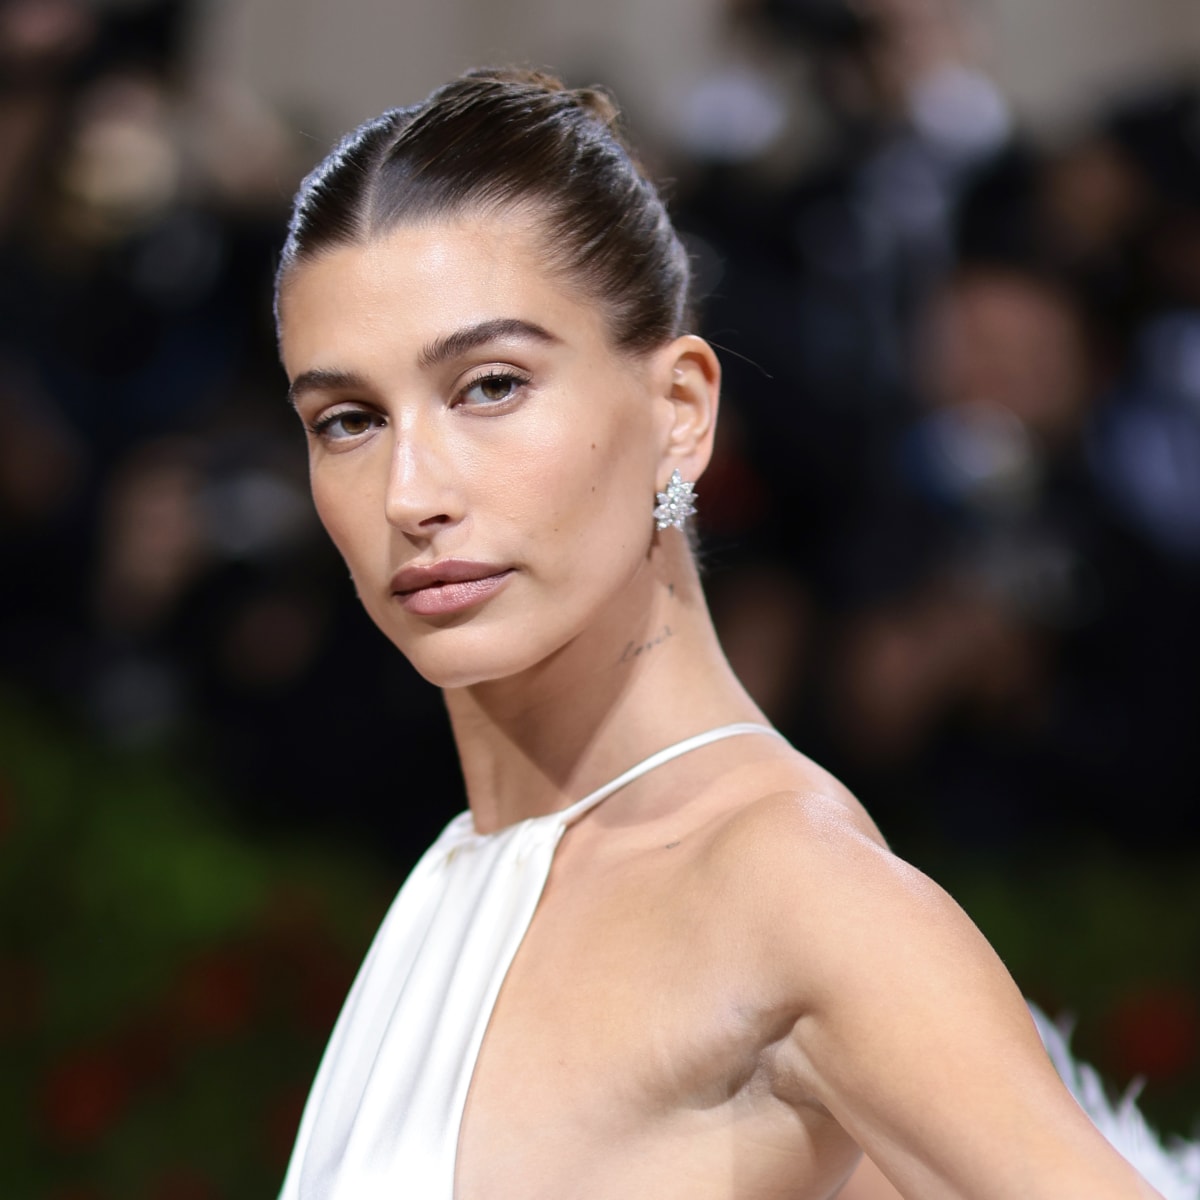 Rhode, the Fashion Brand, Is Suing Rhode, Hailey Bieber's Beauty Line  [Updated] - Fashionista